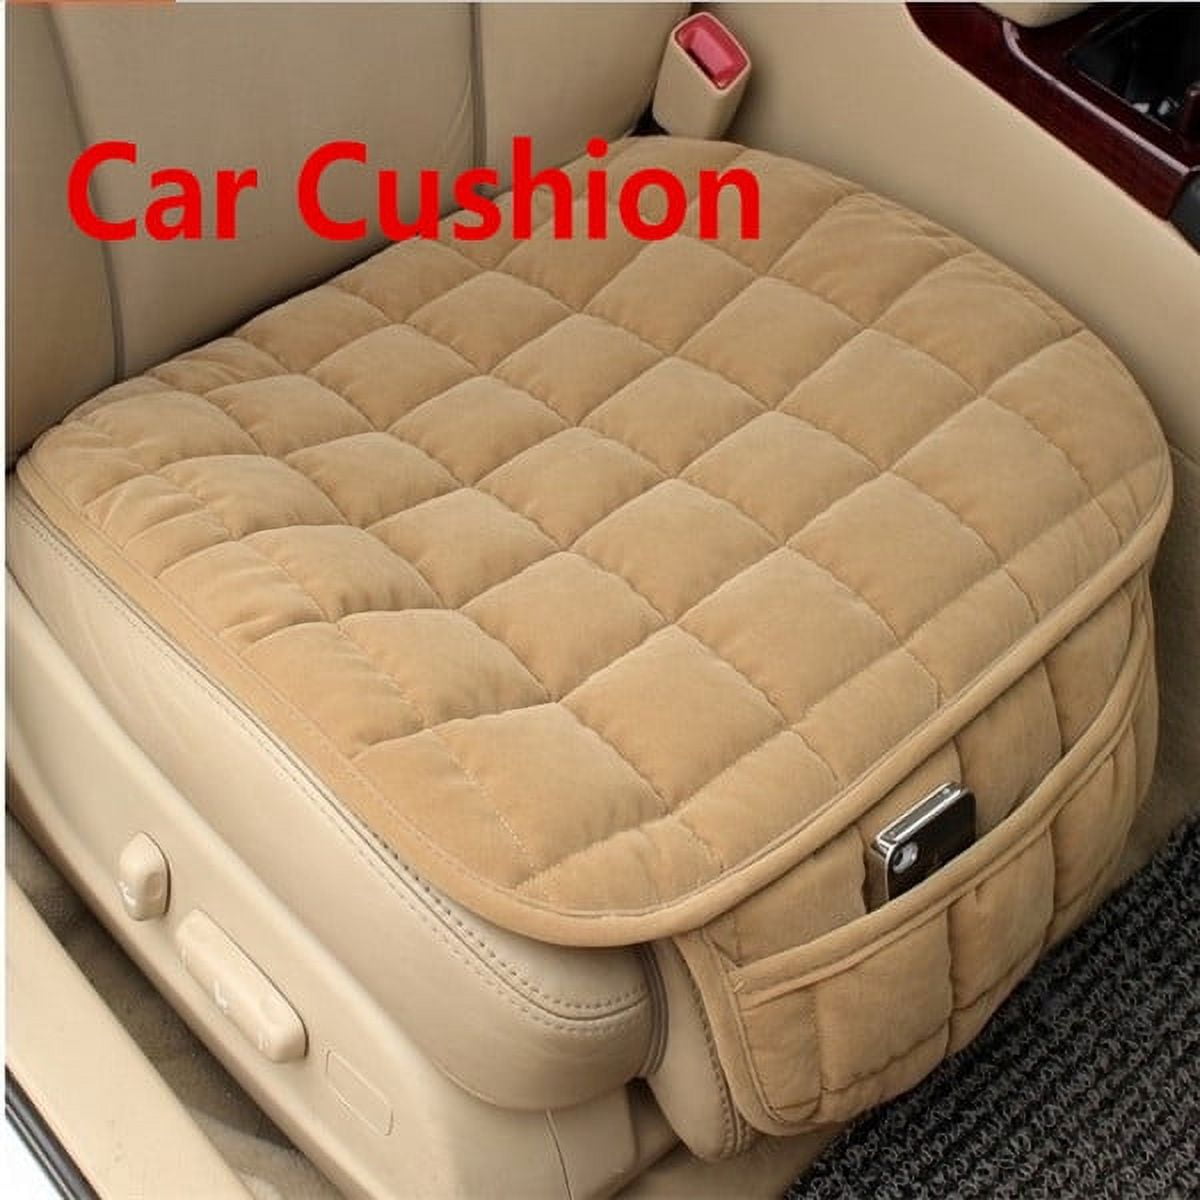  Ruberpig Car Seat Cushion Breathable Leather Auto Seat Cushion  Waterproof Protectors Interior Accessories Fit for Most Cars Luxury - Purple  : Automotive